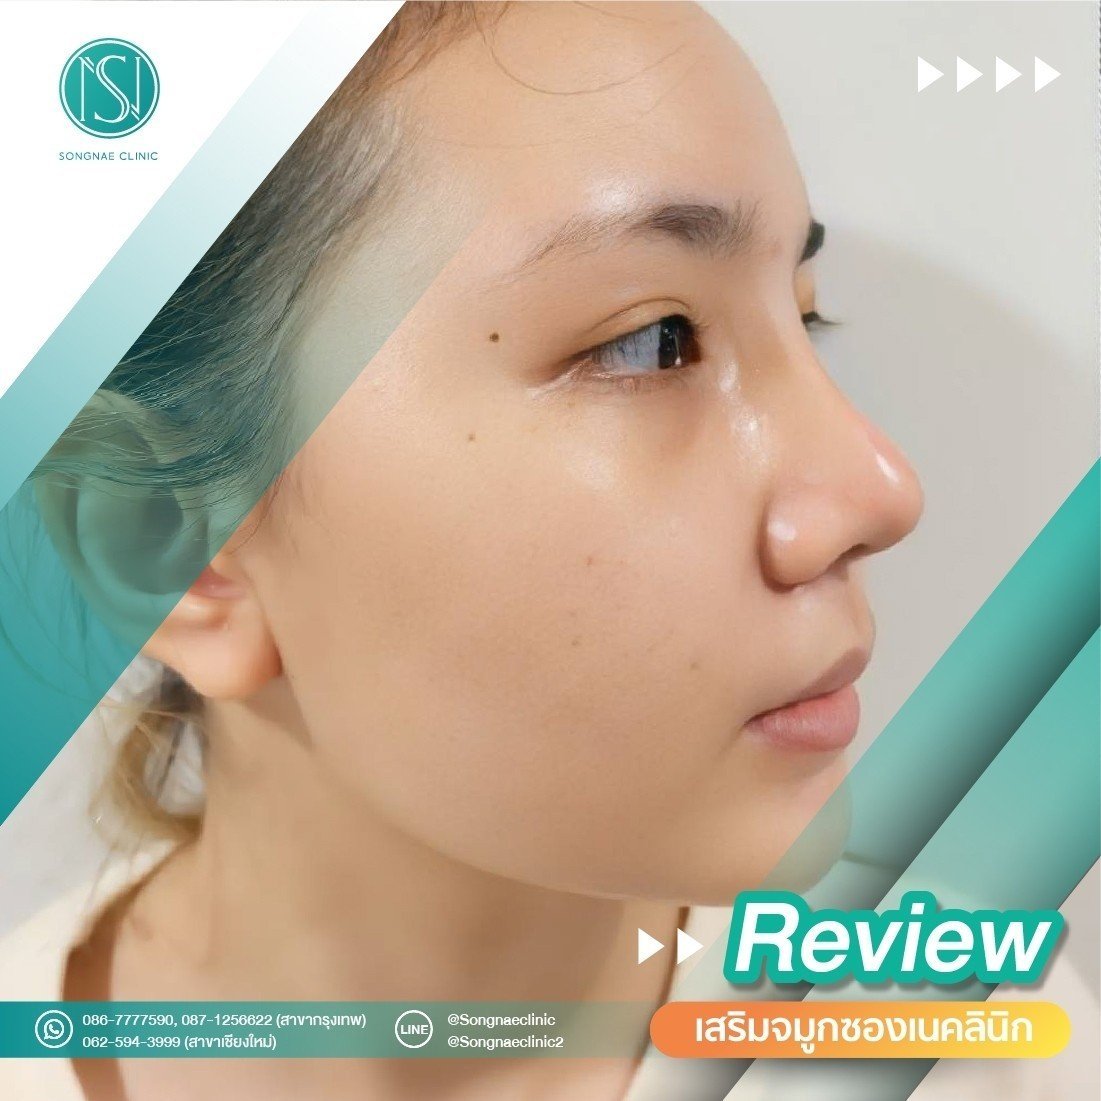 Review SongnaeClinic